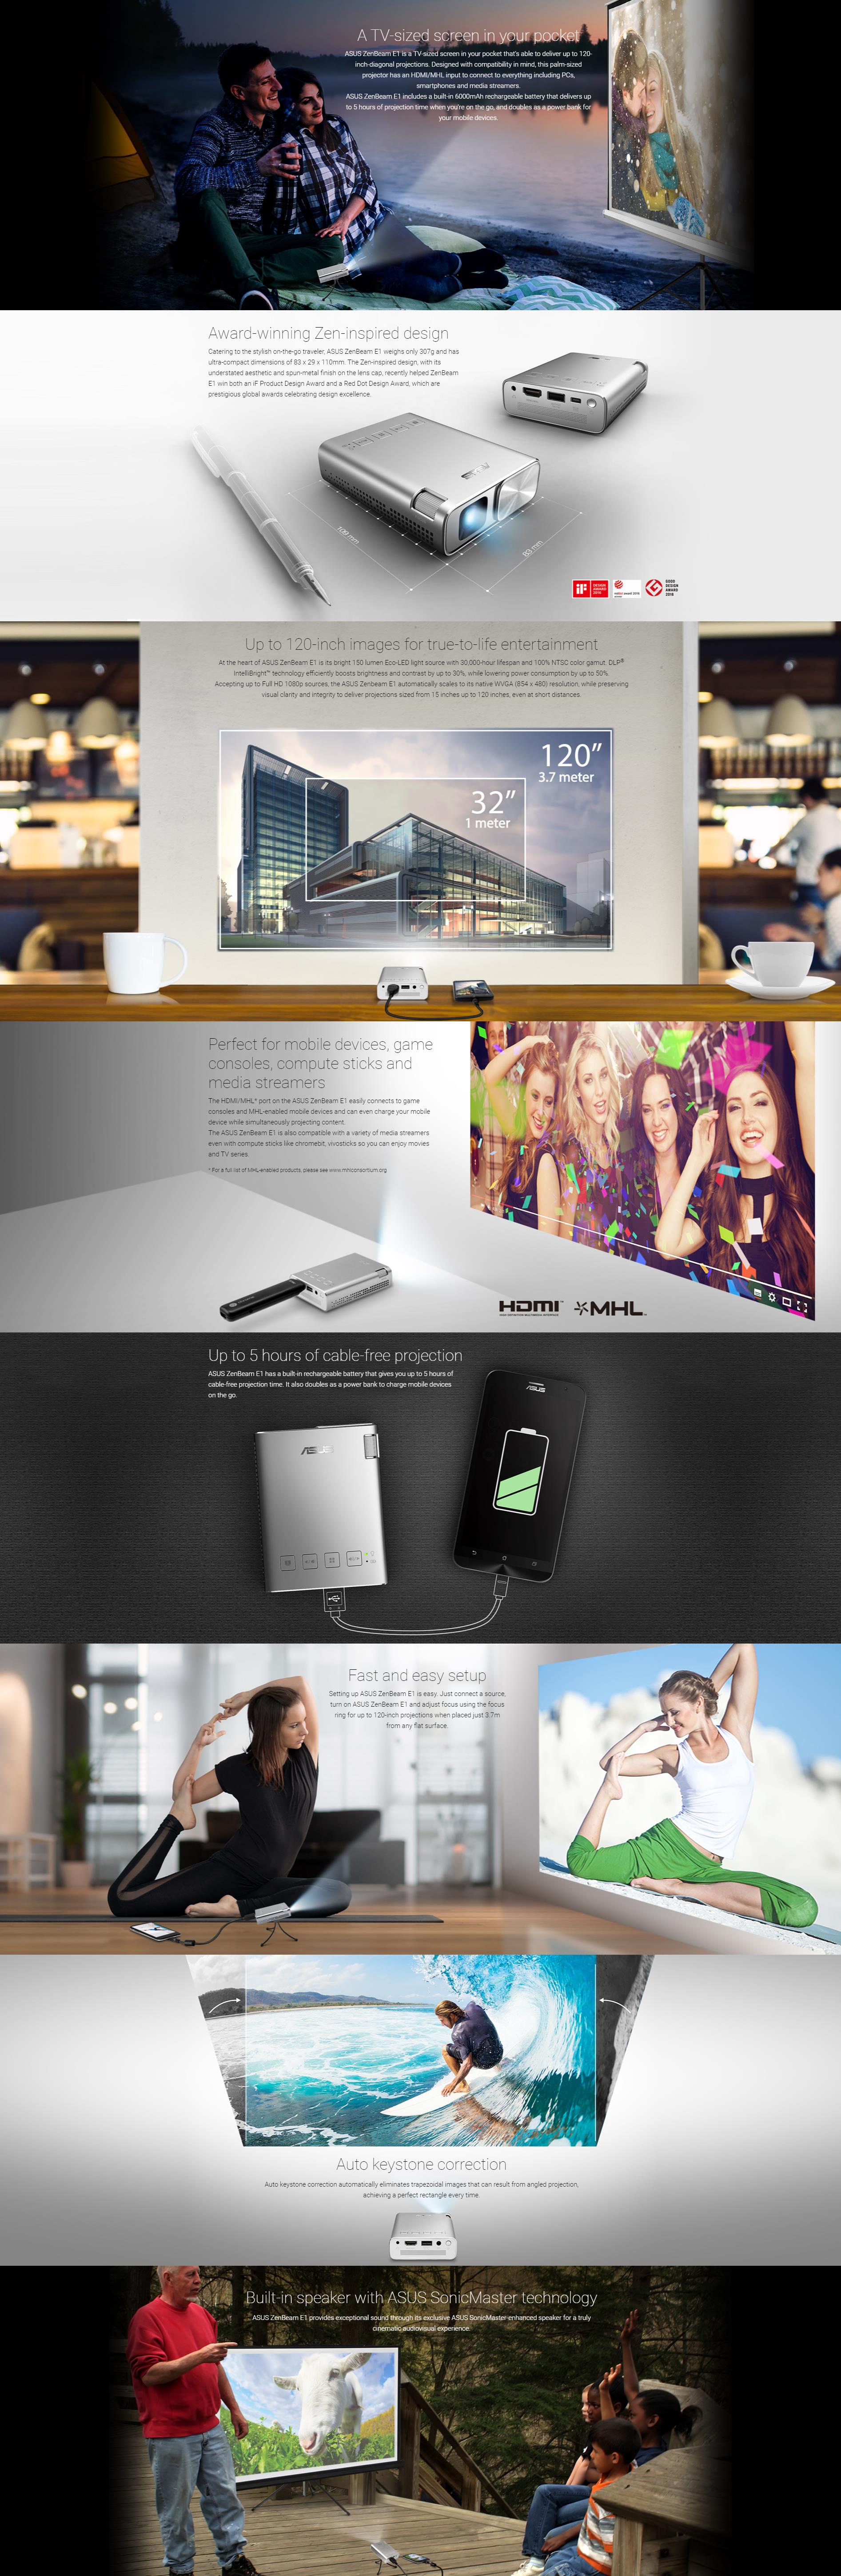 A large marketing image providing additional information about the product Asus Zenbeam E1 Pocket LED Projector - Additional alt info not provided